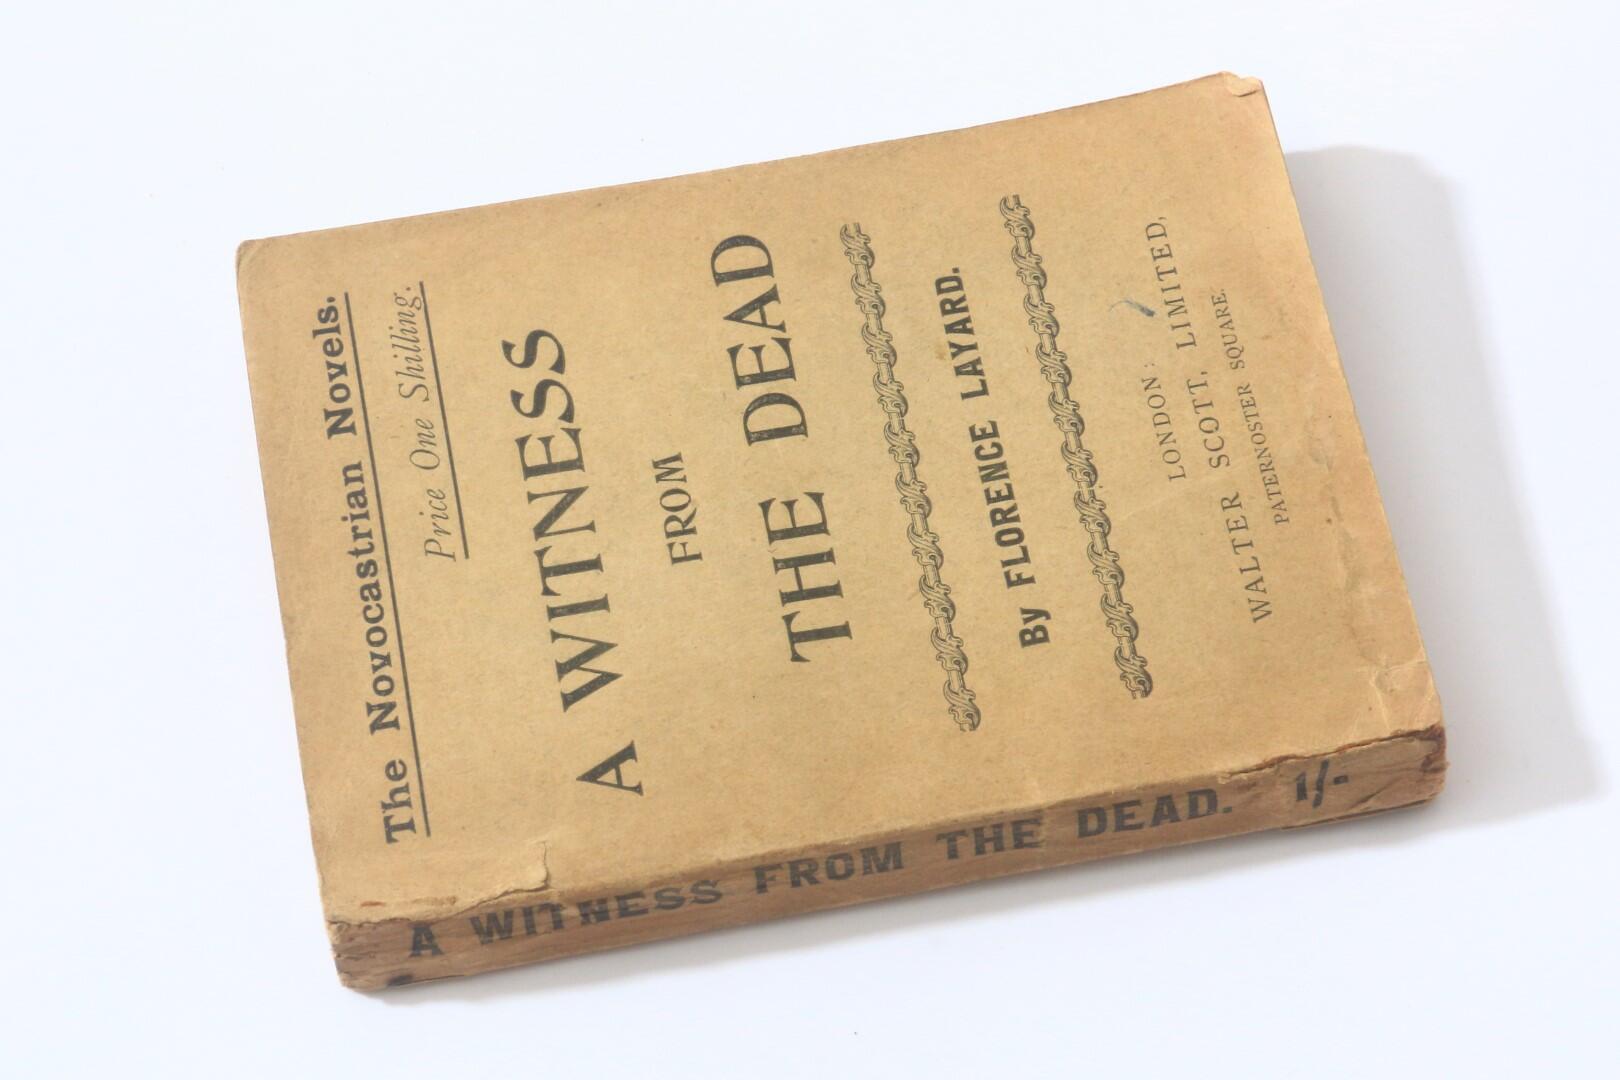 Florence Layard - A Witness from the Dead - Walter Scott, 1889, First Edition.